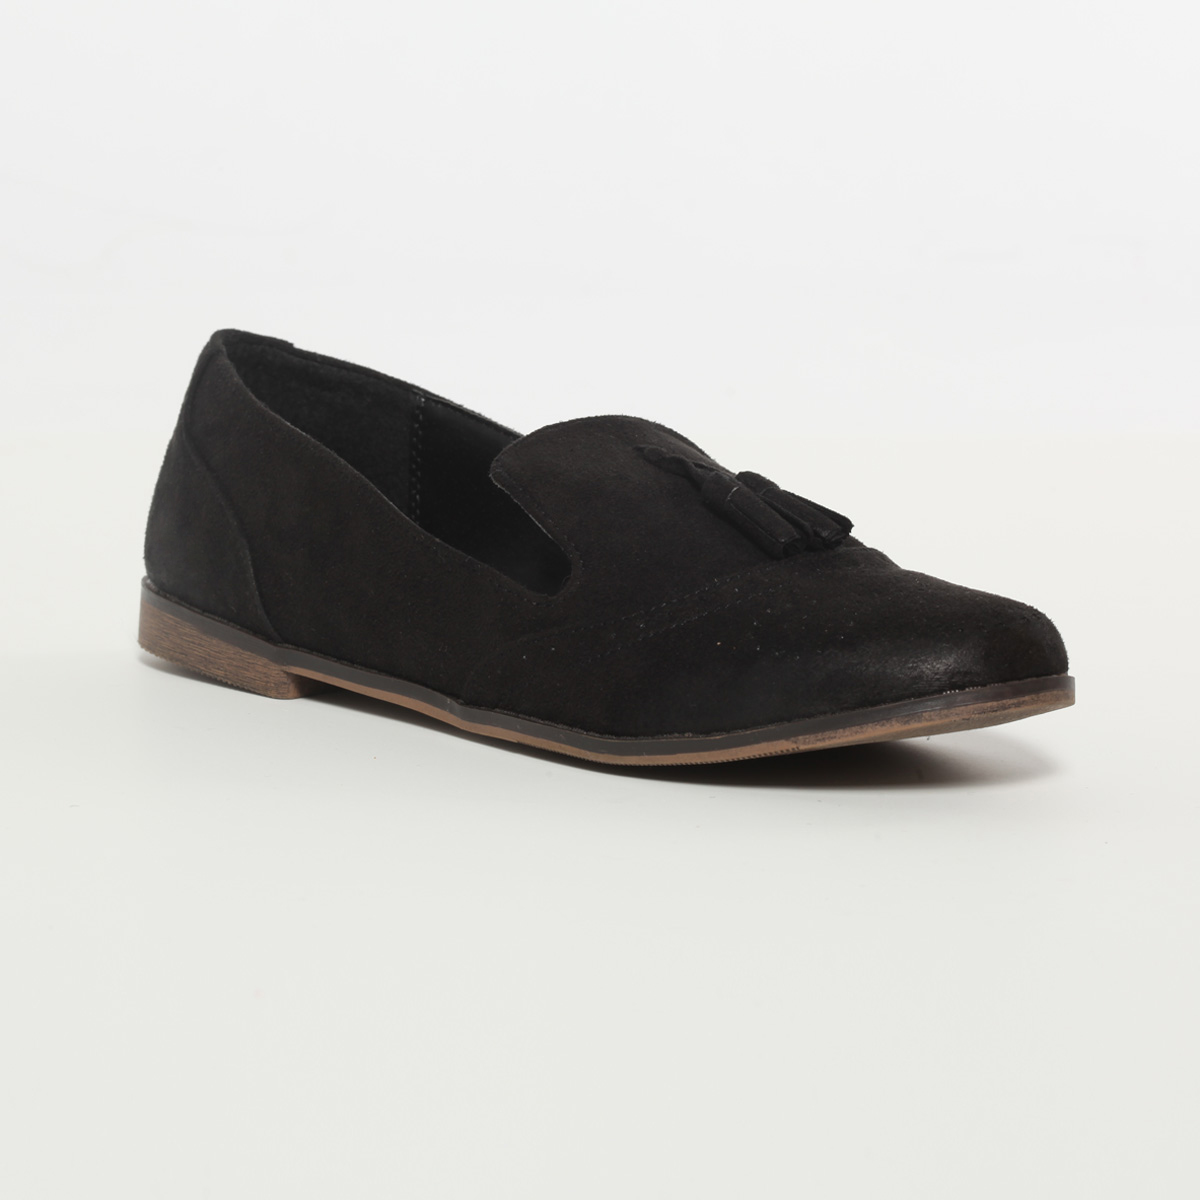 Quinly Suede Tasseled Loafers by Qupid